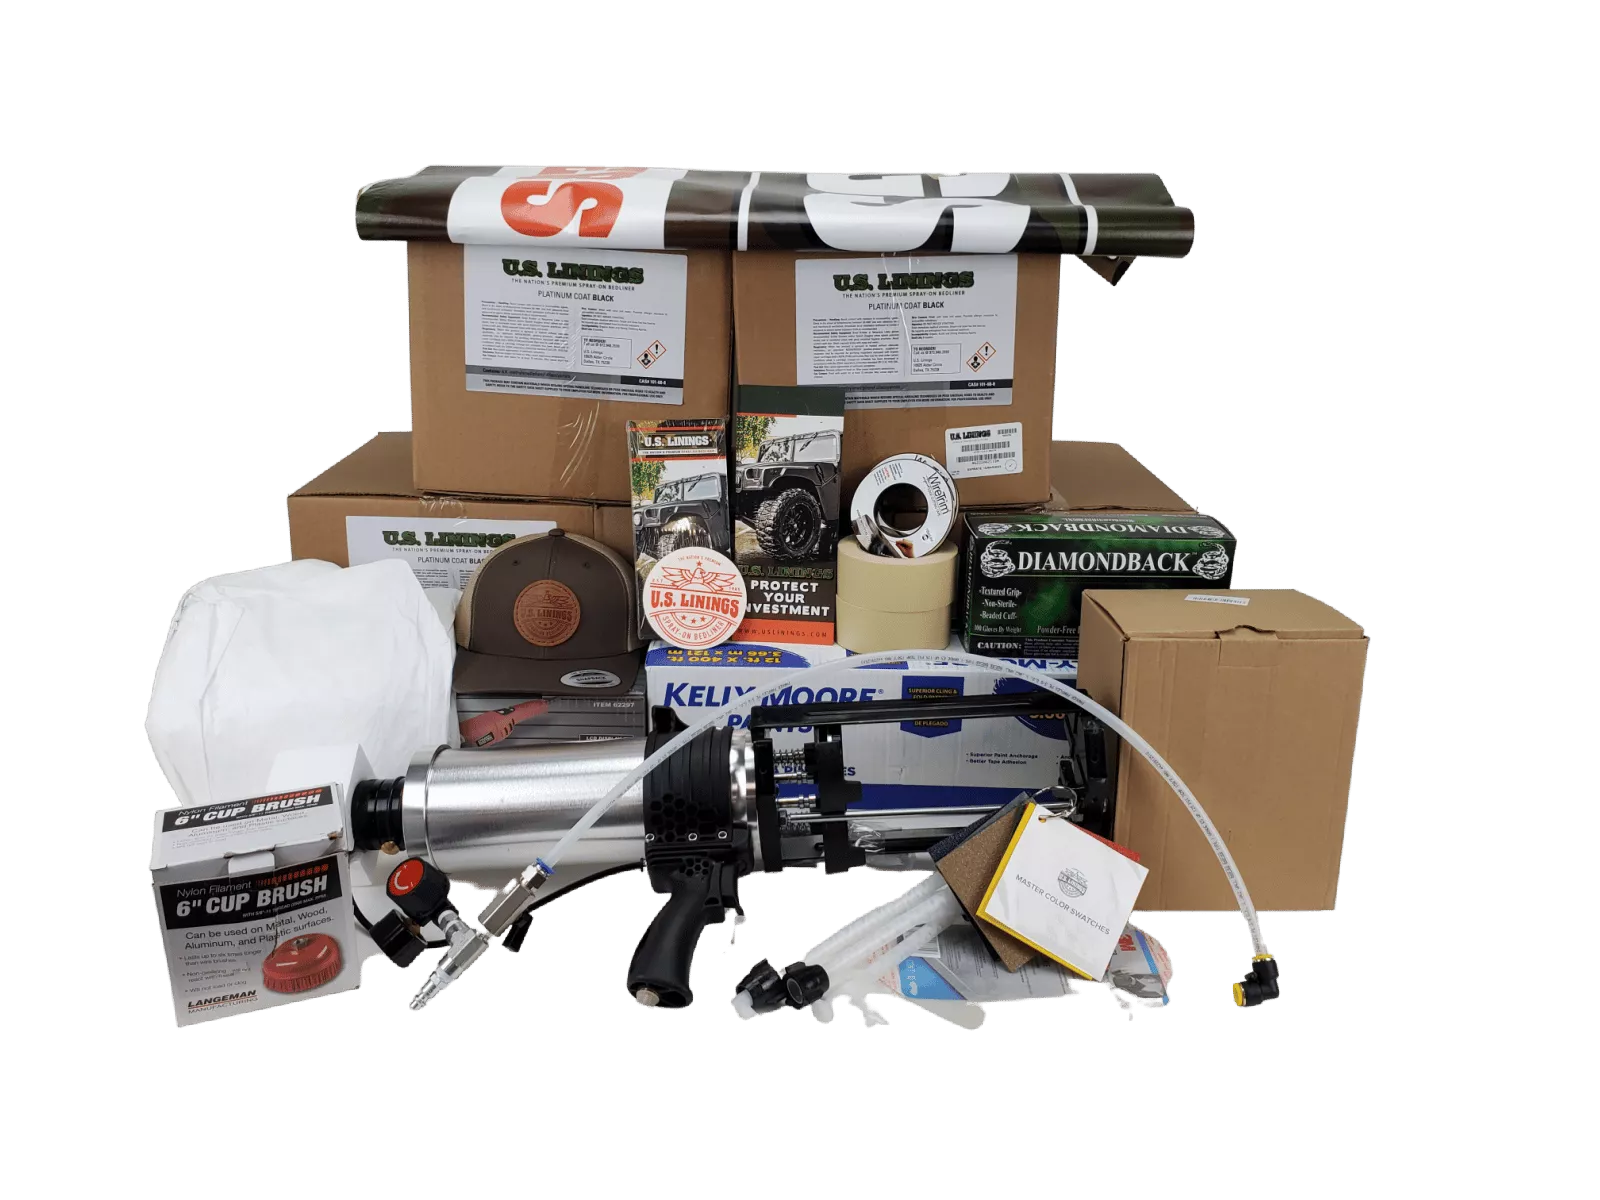 Comprehensive start-up kit for new dealers, featuring marketing materials, essential chemicals, application tools, and the versatile cartridge applicator.